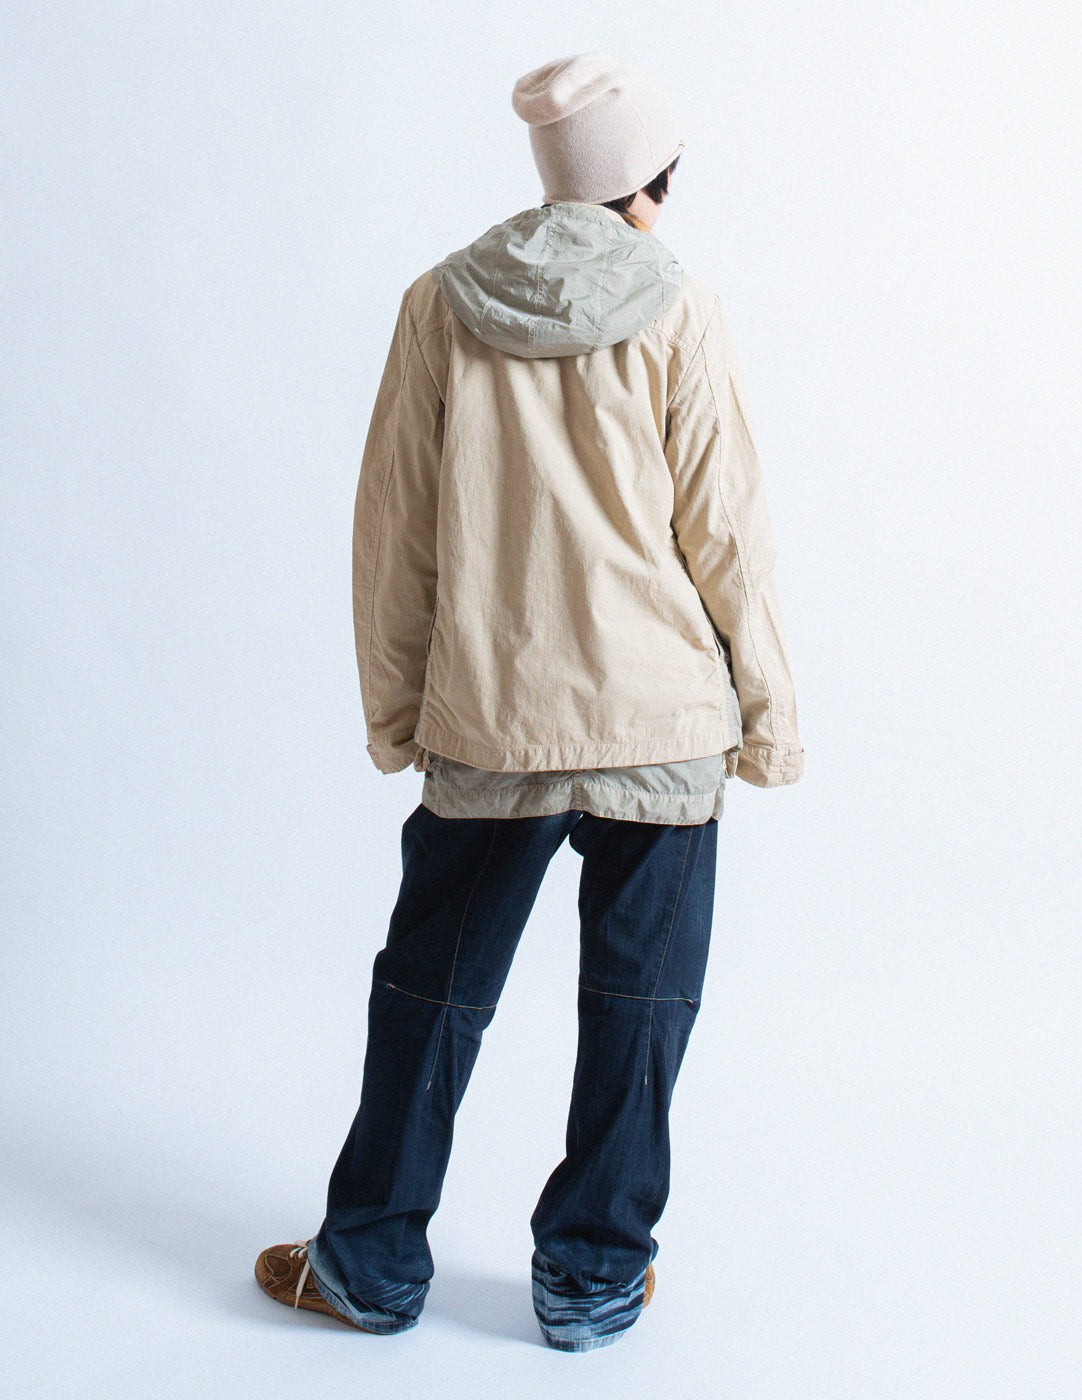 Marithé+François Girbaud layered utility jacket back view